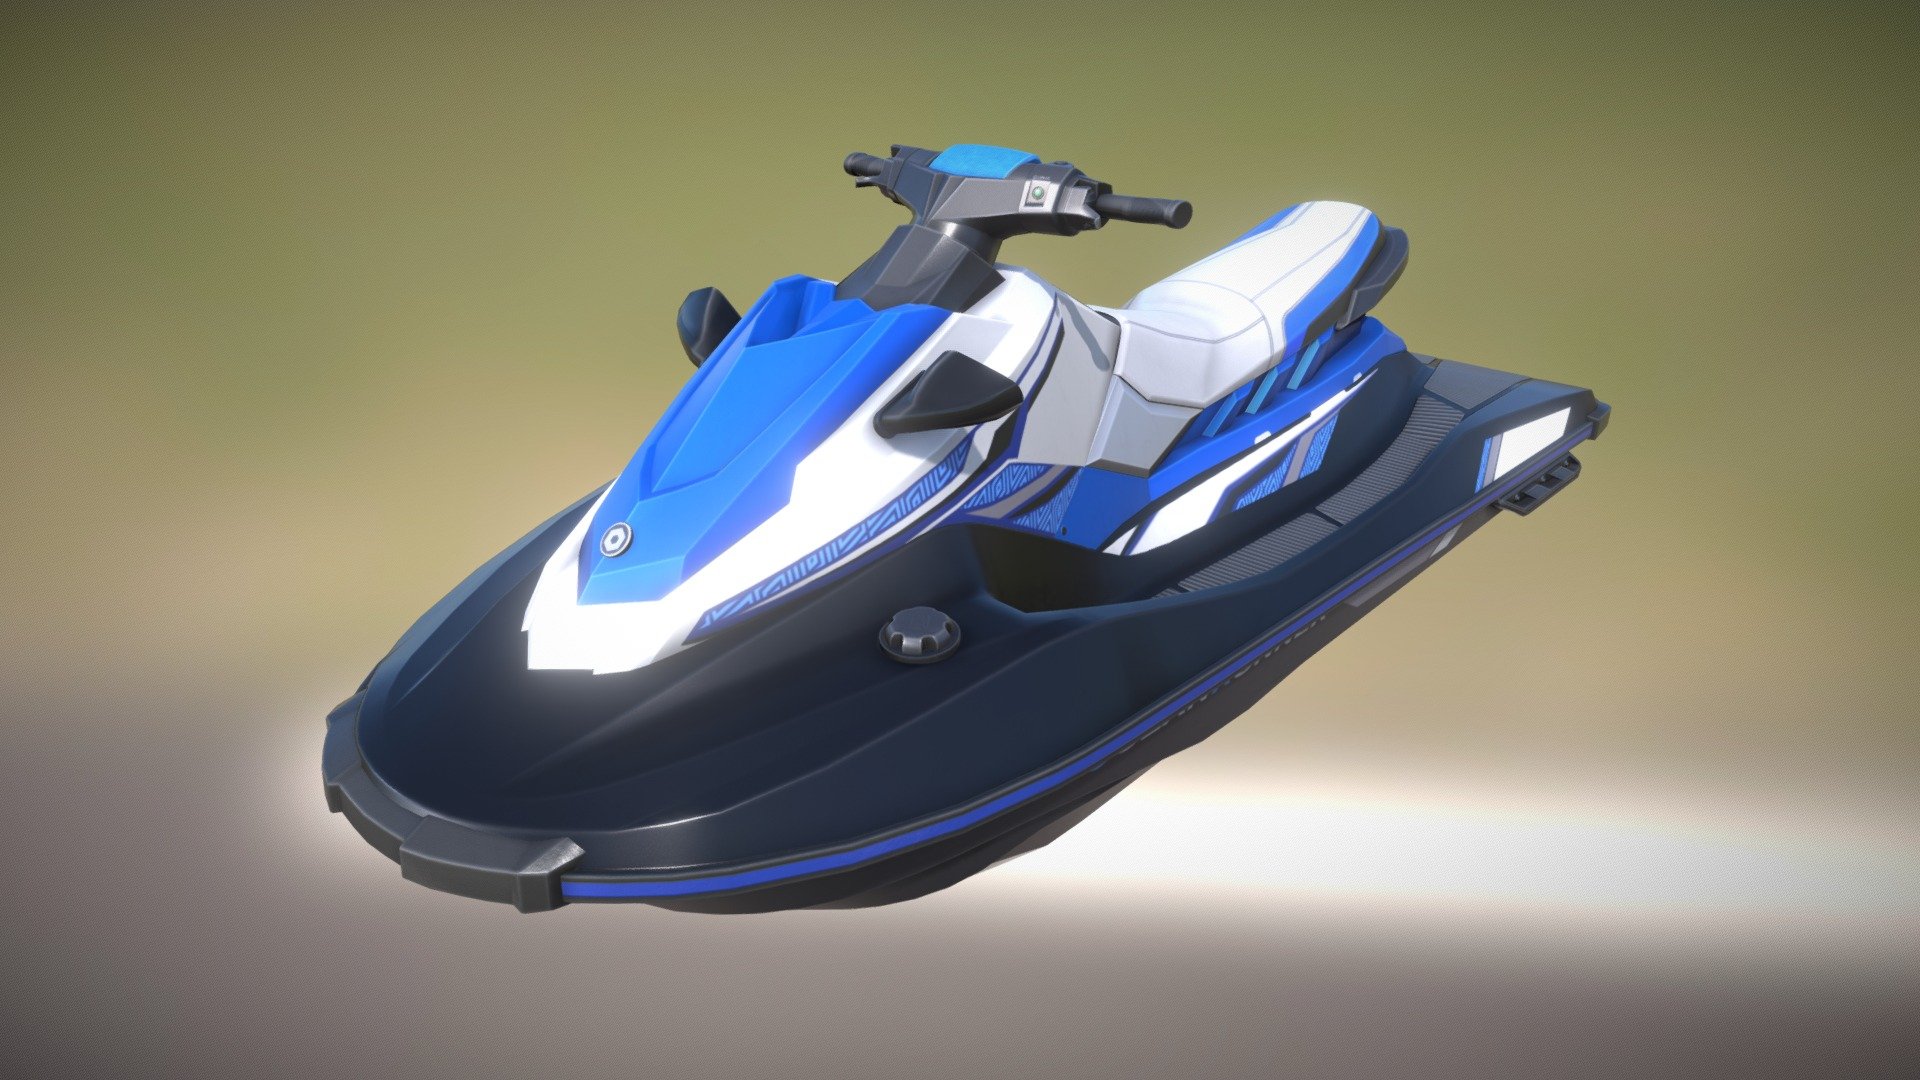 This model is GAME READY for Unity

File Formats:

3ds Max 2019 FBX (Multi Format)

Model: The Jet Ski is modeled on a real scale.

Geometry count:




21,747 polys 

44,185 tris 

23,371 verts 

Textures: 2048x2048 Albedo, Metallic, Normal Maps, Ambient Occlusion
Textures designed for physically based rendering (PBR) Textures in .png format

I have exported specialized texture maps for Unity 3d model